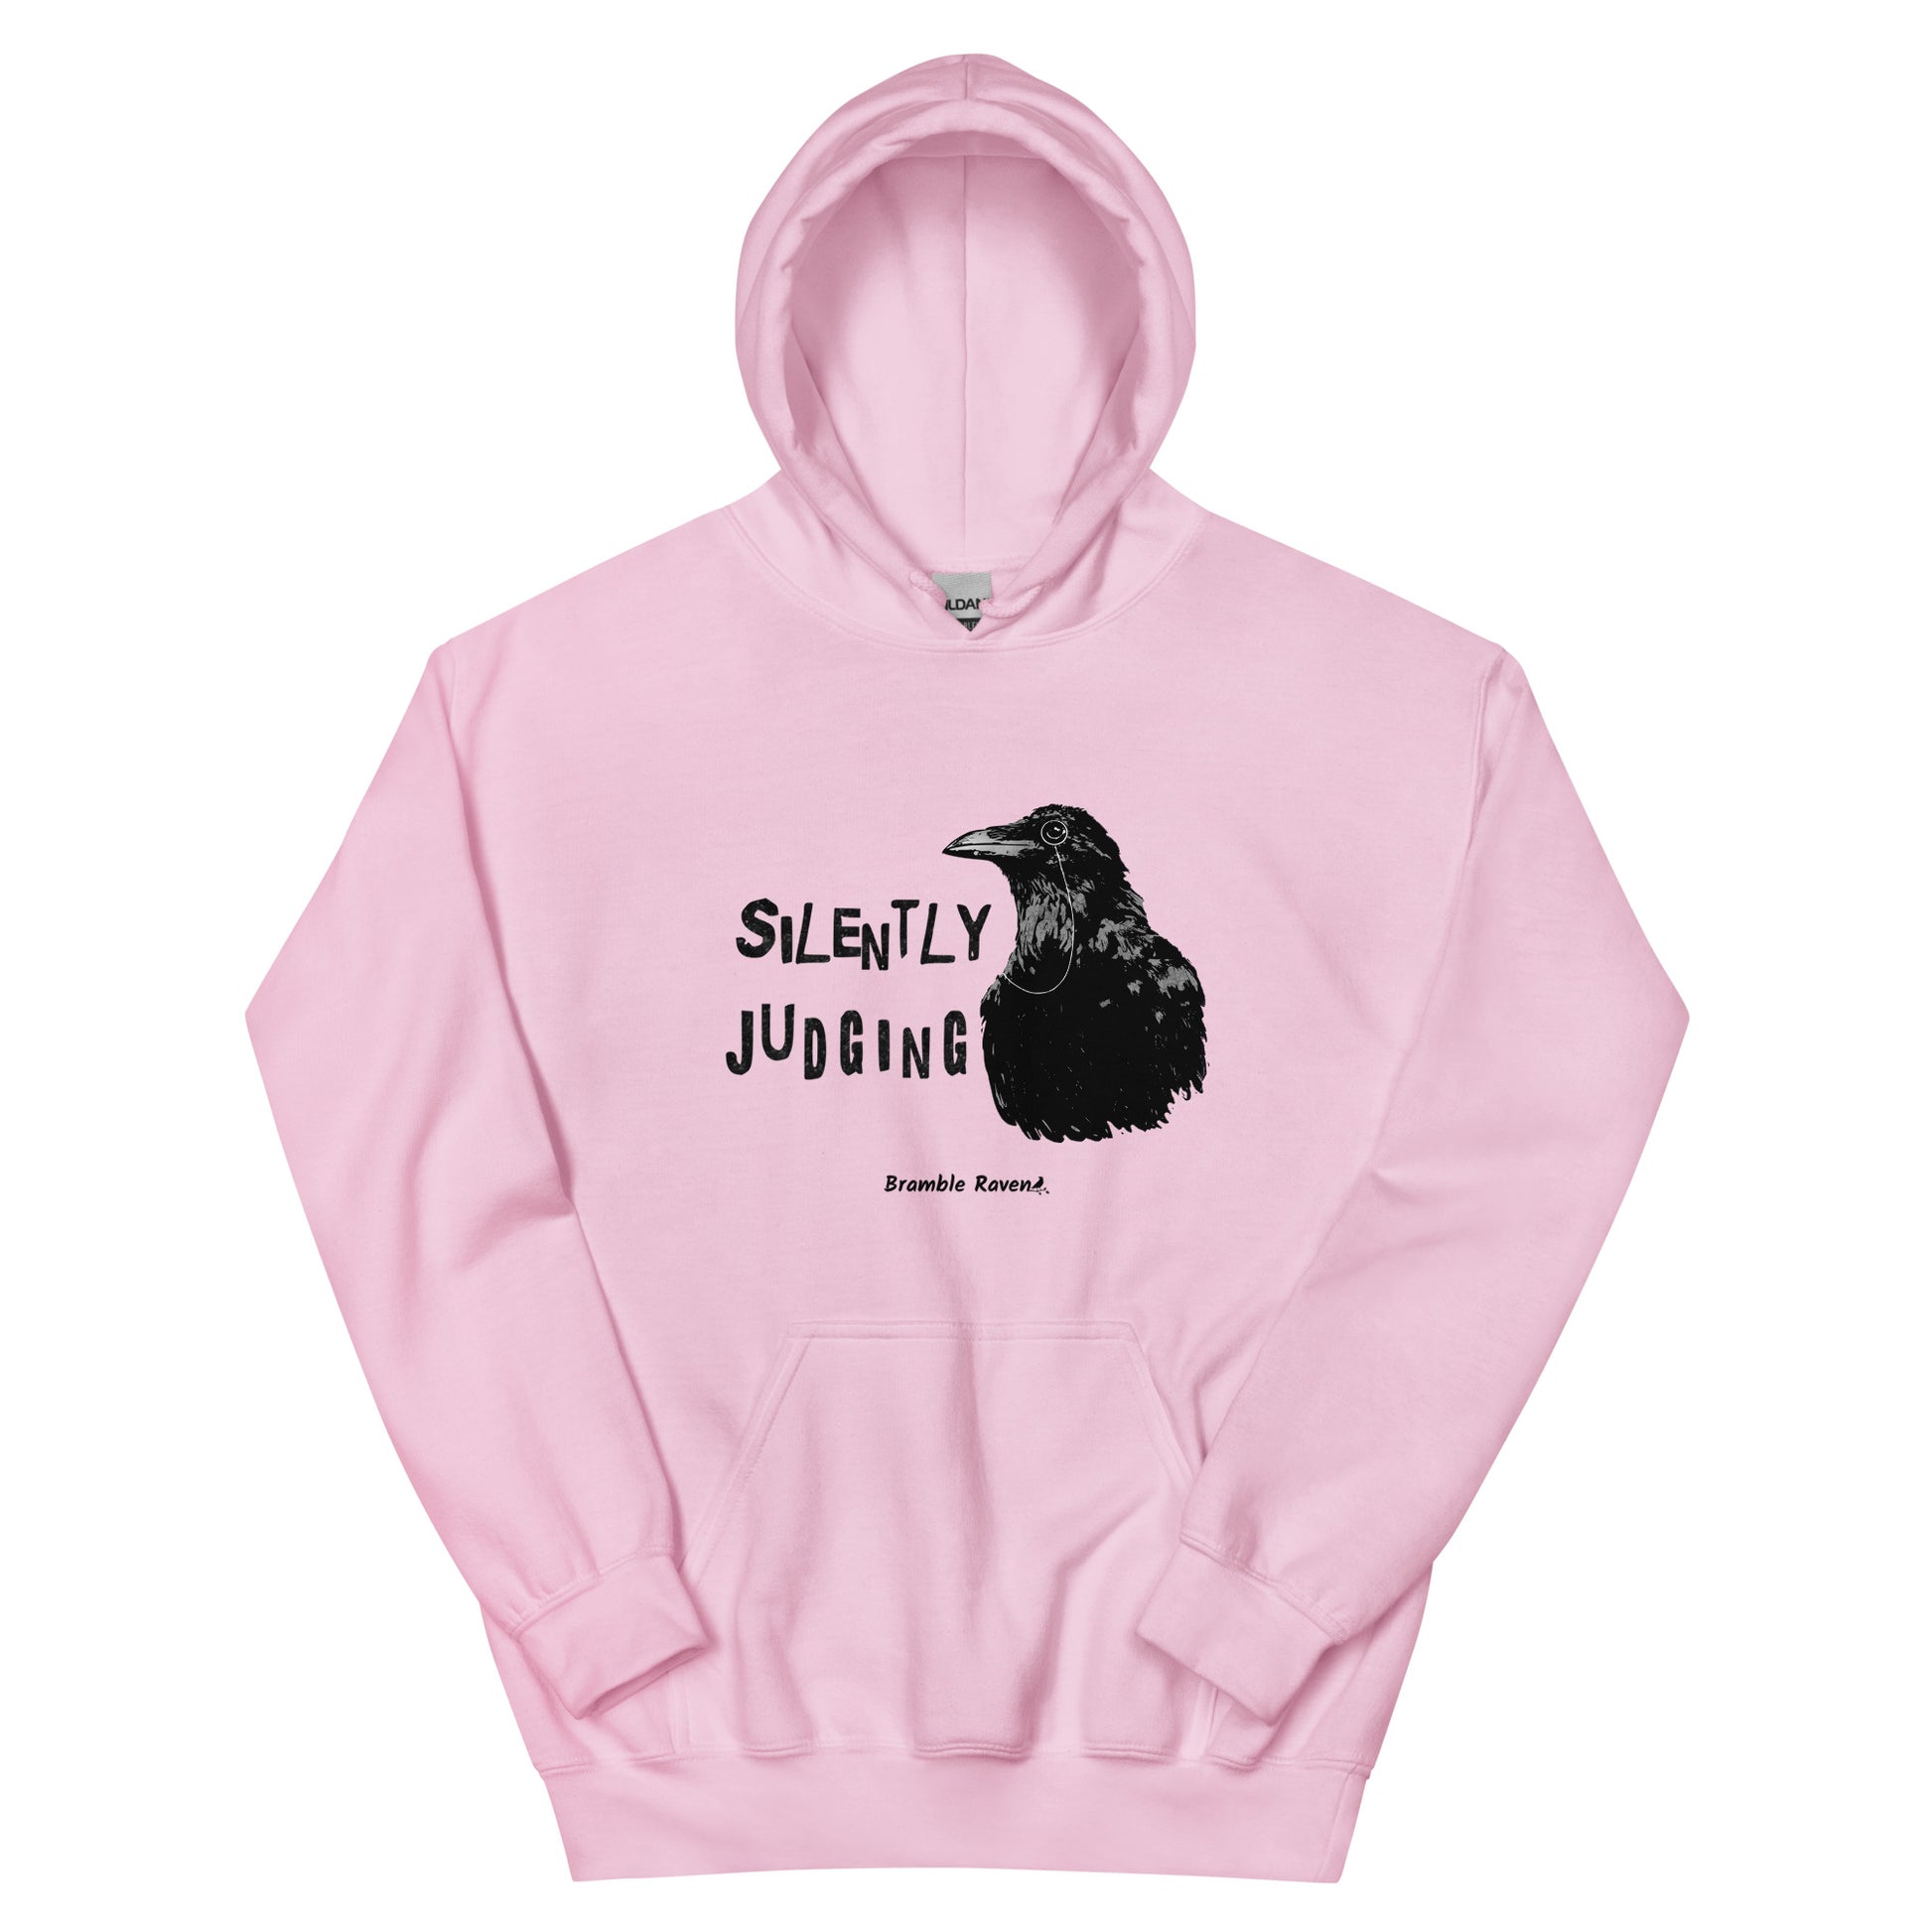 Unisex light pink colored hoodie with horizontal design of silently judging text by black crow wearing a monocle.  Design on the front of hoodie. Features double-lined hood and front pouch pocket.